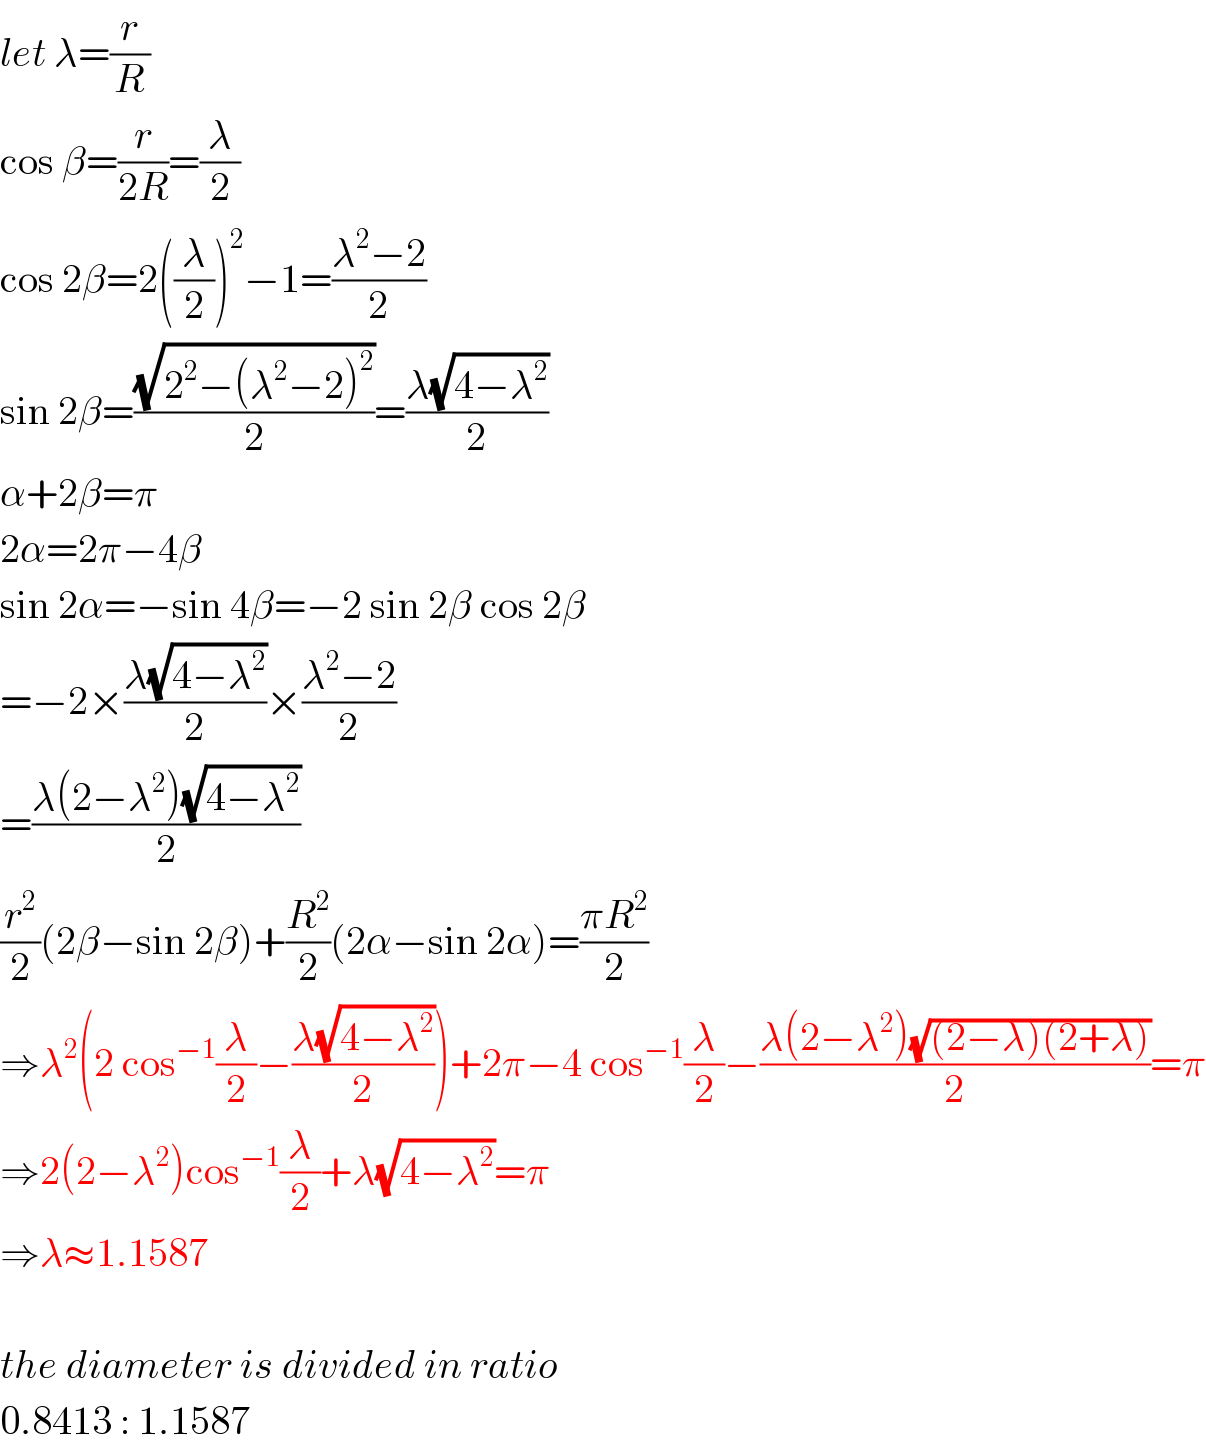 let λ=(r/R)  cos β=(r/(2R))=(λ/2)  cos 2β=2((λ/2))^2 −1=((λ^2 −2)/2)  sin 2β=((√(2^2 −(λ^2 −2)^2 ))/2)=((λ(√(4−λ^2 )))/2)  α+2β=π  2α=2π−4β  sin 2α=−sin 4β=−2 sin 2β cos 2β  =−2×((λ(√(4−λ^2 )))/2)×((λ^2 −2)/2)  =((λ(2−λ^2 )(√(4−λ^2 )))/2)  (r^2 /2)(2β−sin 2β)+(R^2 /2)(2α−sin 2α)=((πR^2 )/2)  ⇒λ^2 (2 cos^(−1) (λ/2)−((λ(√(4−λ^2 )))/2))+2π−4 cos^(−1) (λ/2)−((λ(2−λ^2 )(√((2−λ)(2+λ))))/2)=π  ⇒2(2−λ^2 )cos^(−1) (λ/2)+λ(√(4−λ^2 ))=π  ⇒λ≈1.1587    the diameter is divided in ratio  0.8413 : 1.1587  